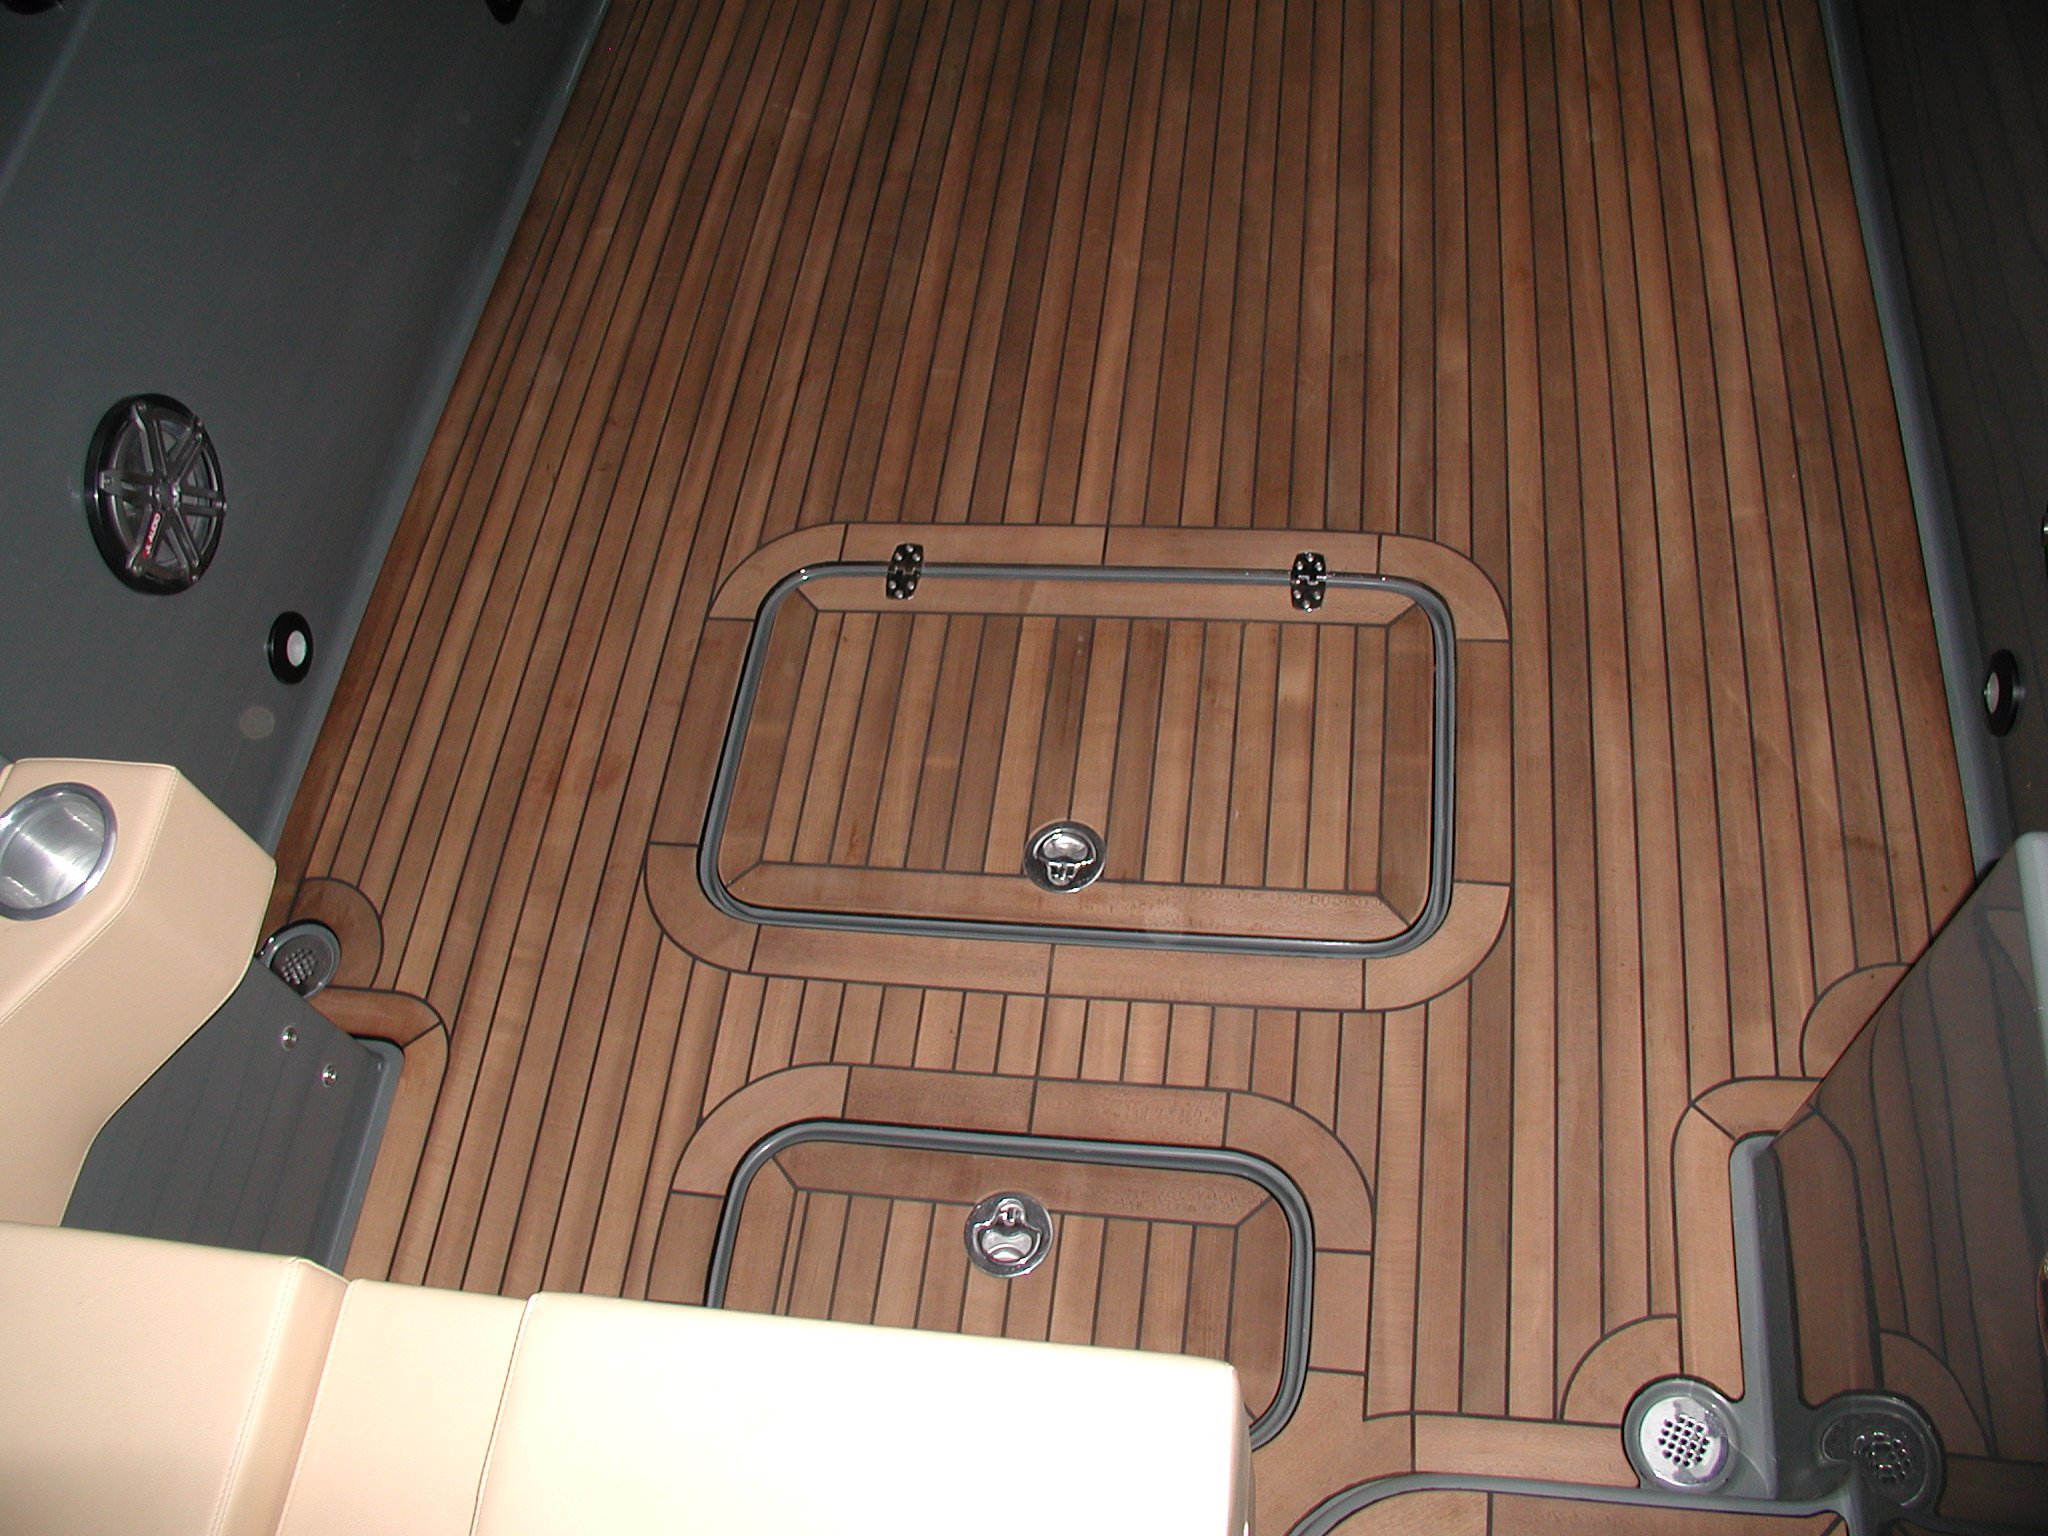 Prefabricated teakdeck for gangboard and cockpit